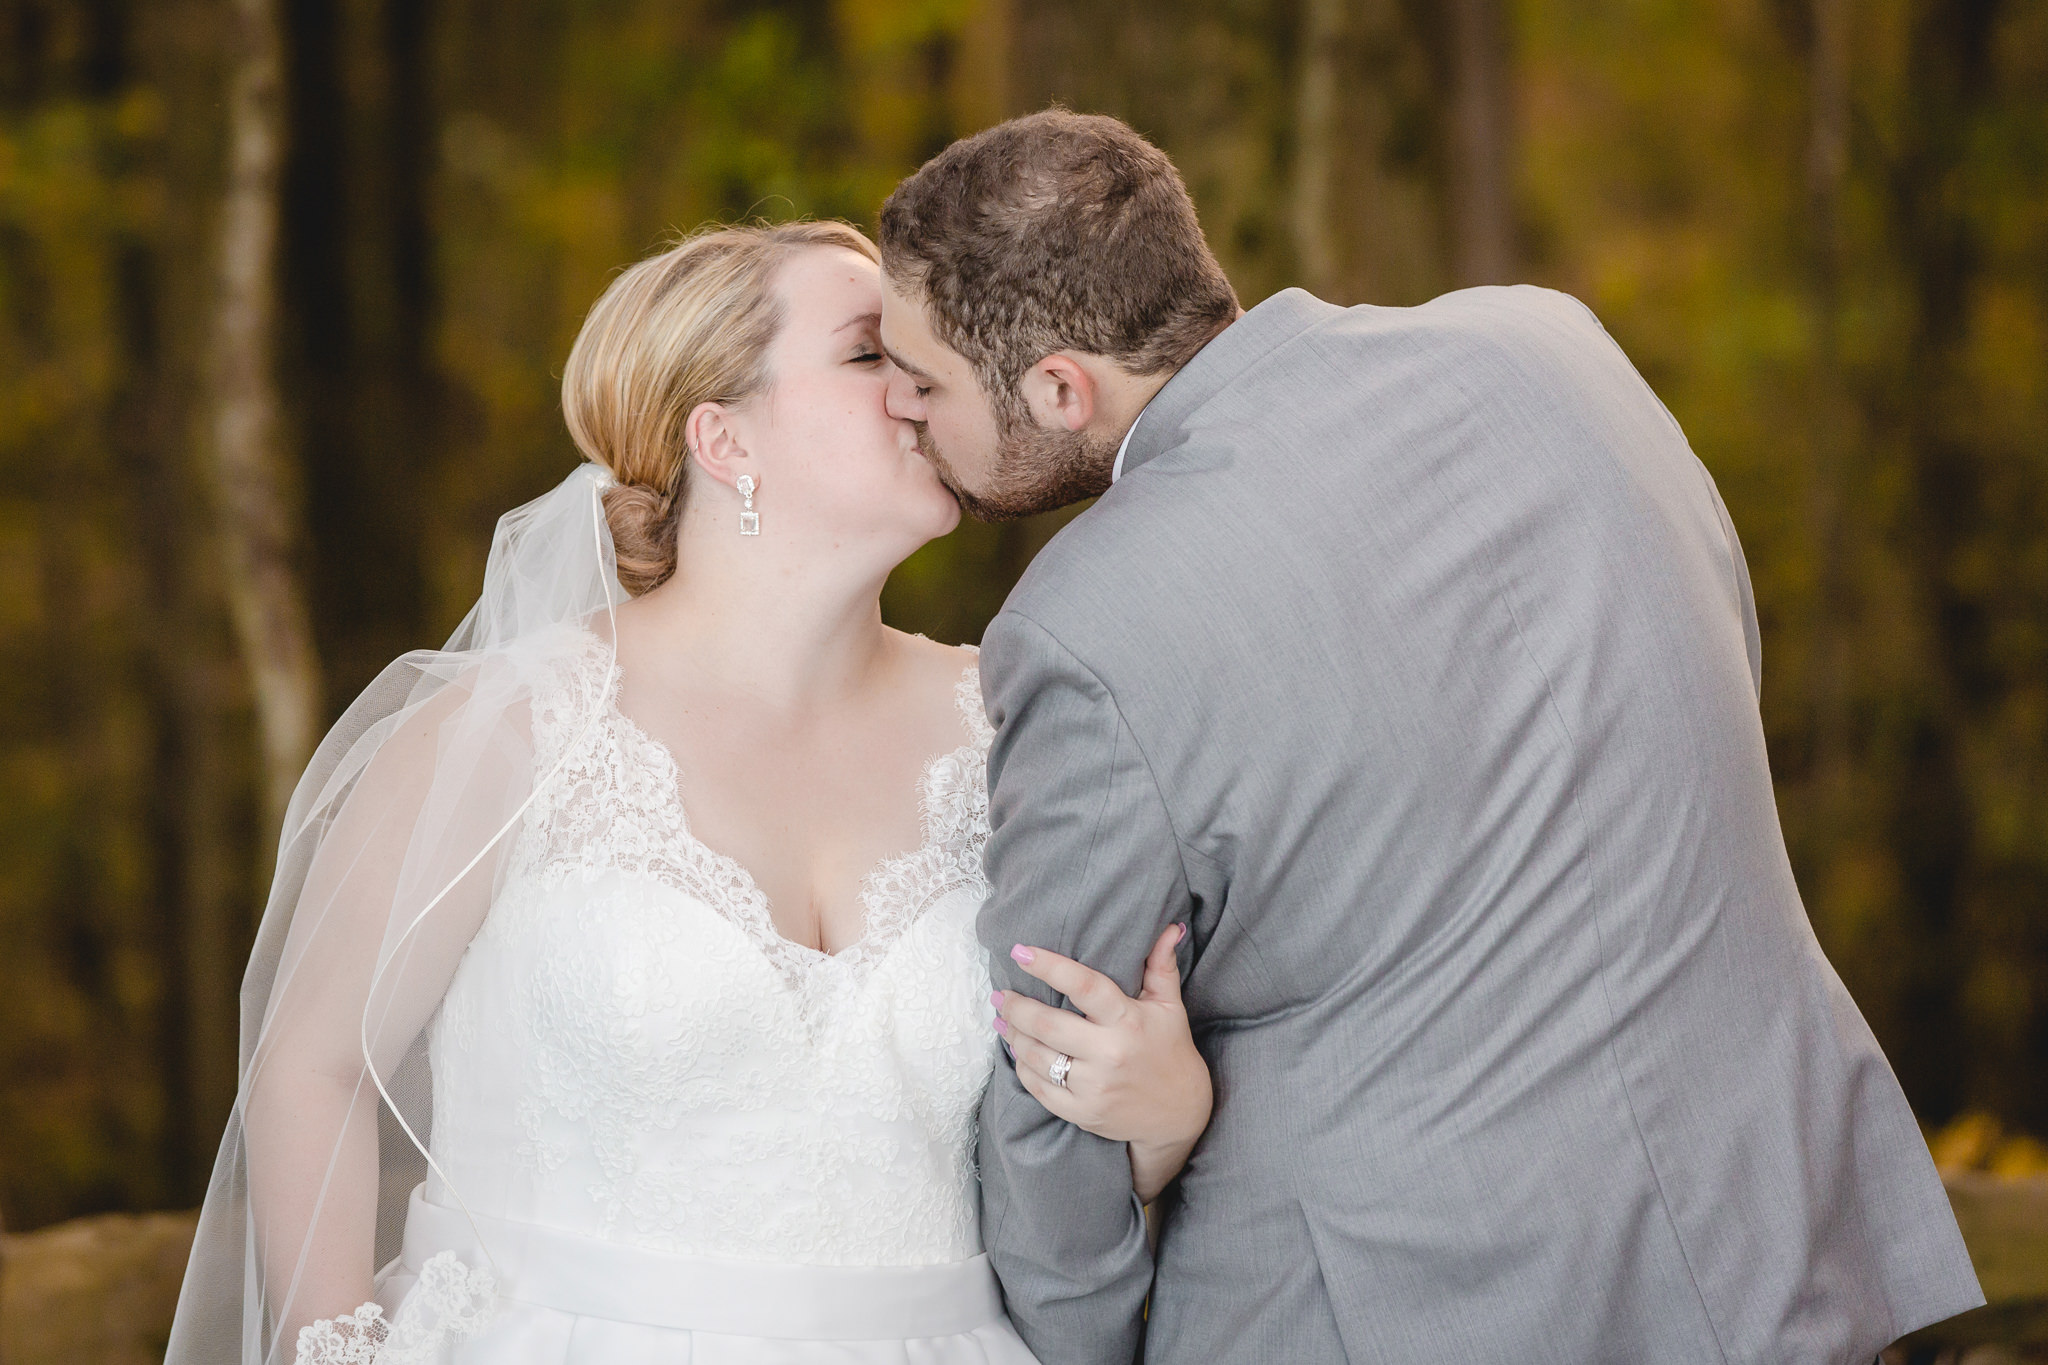 Newlyweds kiss during portraits at the Barn at Soergel Hollow